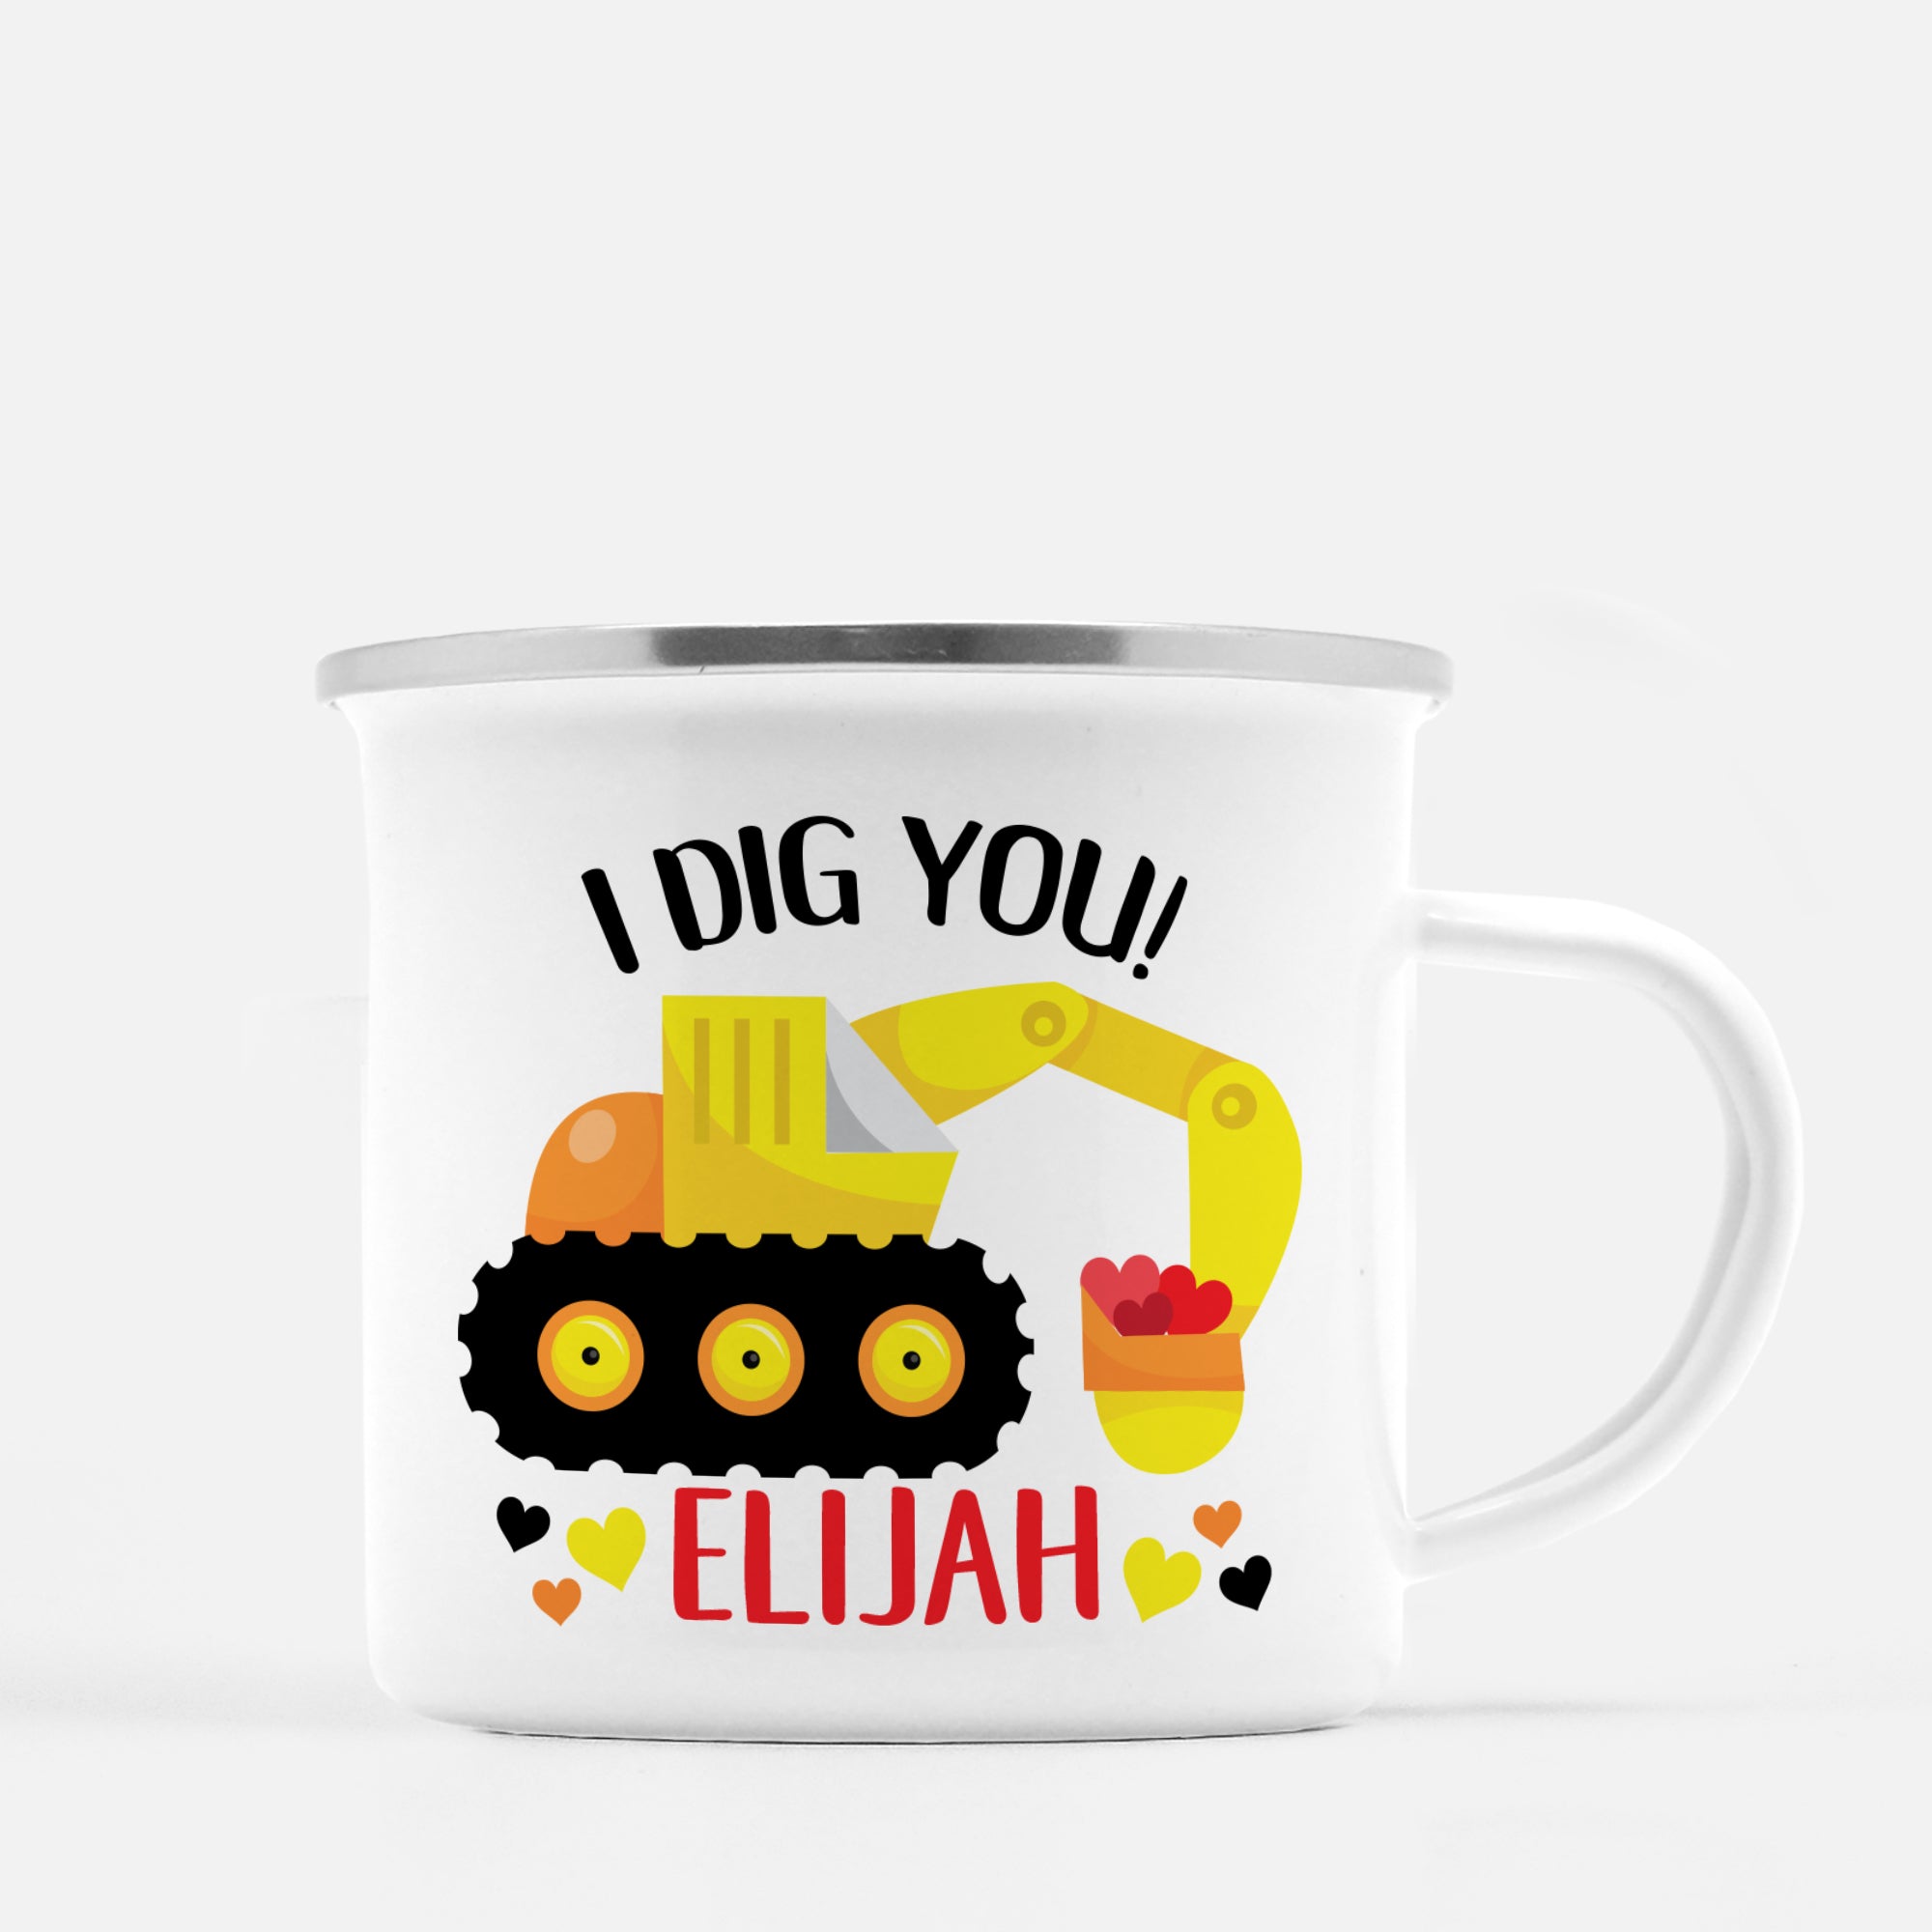 White enamel 12 oz metal camp mug with silver lip | Yellow and orange Backhoe scooping up red hearts | "I Dig You" | Personalized with childs name | Valentine's Day gift